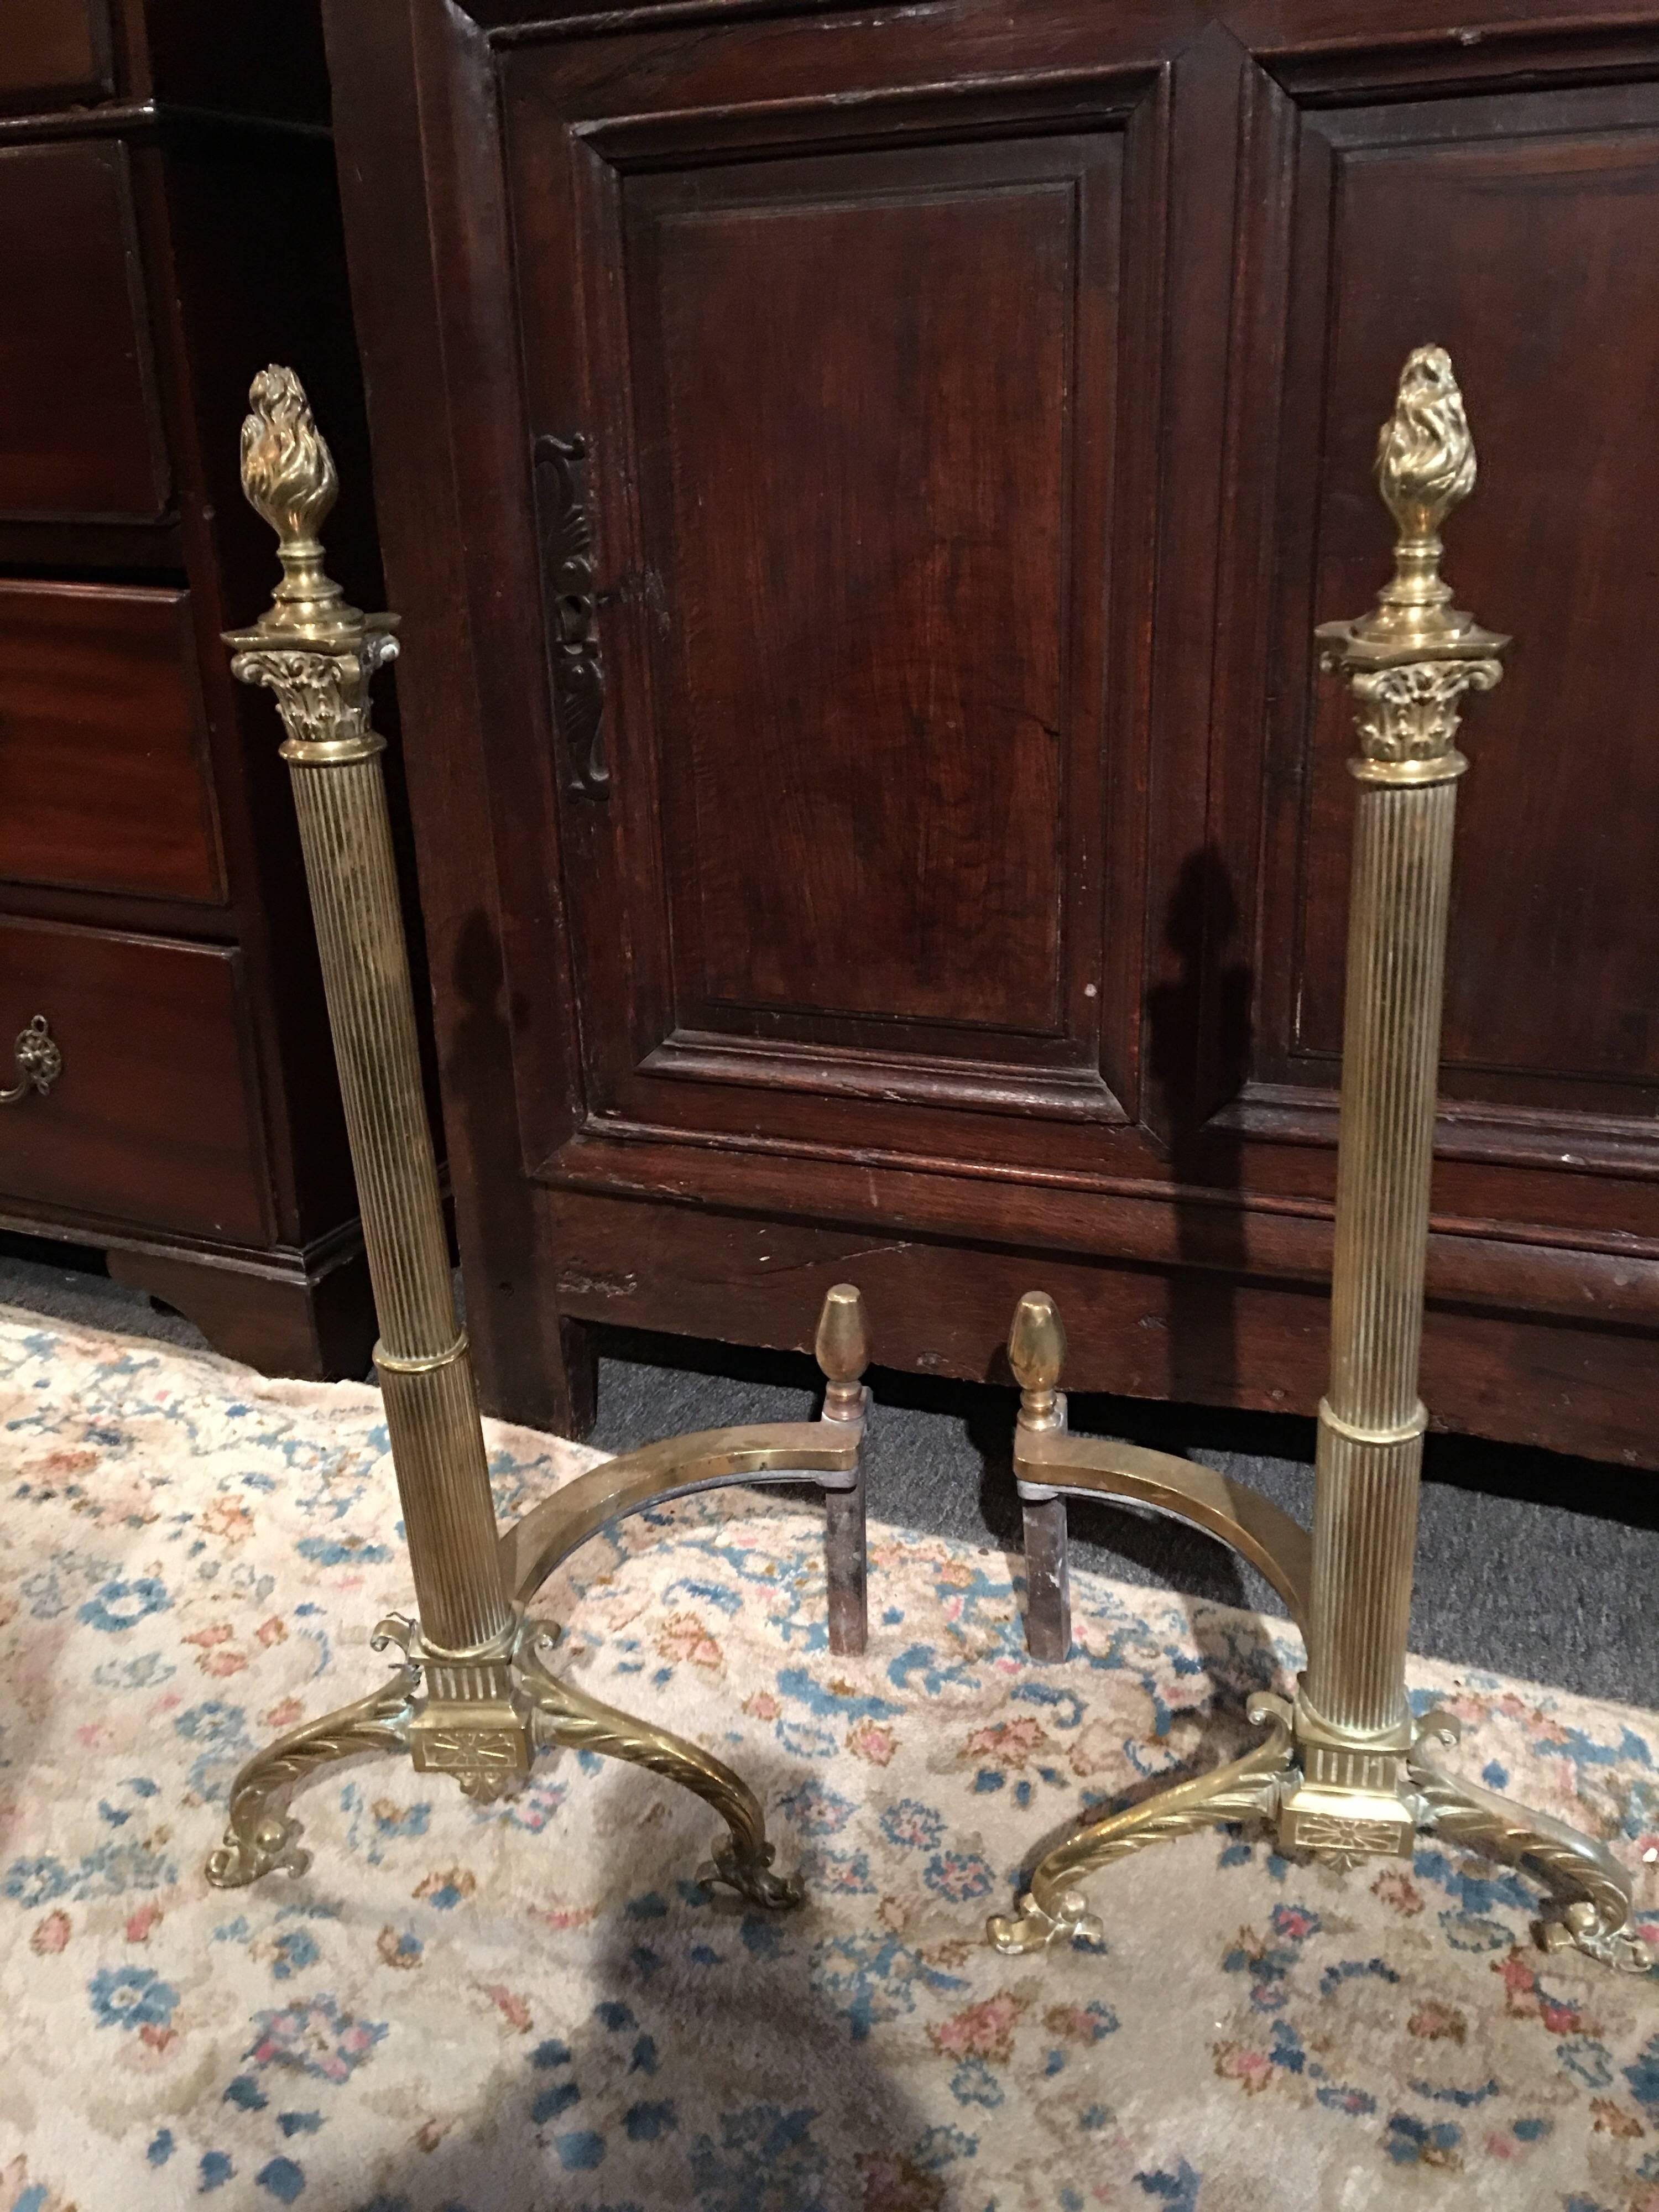 Pair of French andirons or chenets with flame finial design, 19th century.